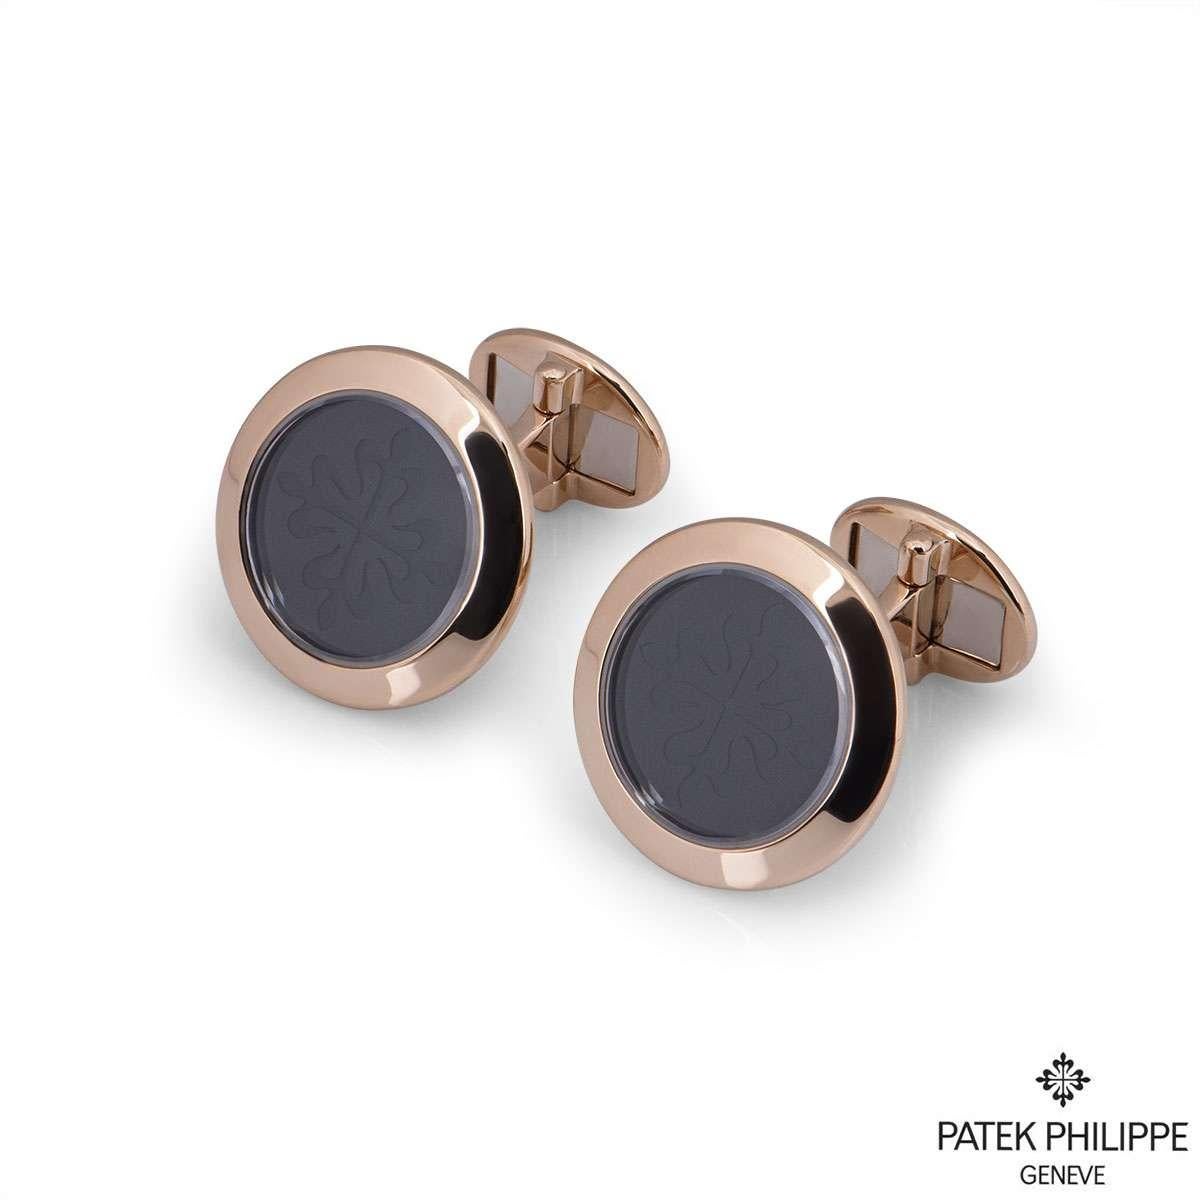 A sublime pair of 18k rose gold Patek Philippe cufflinks from the Calatrava collection. Each cufflink is set to the centre with onyx, engraved with the iconic Calatrava cross emblem. The feature motif measures 1.9cm in diameter and the body of the